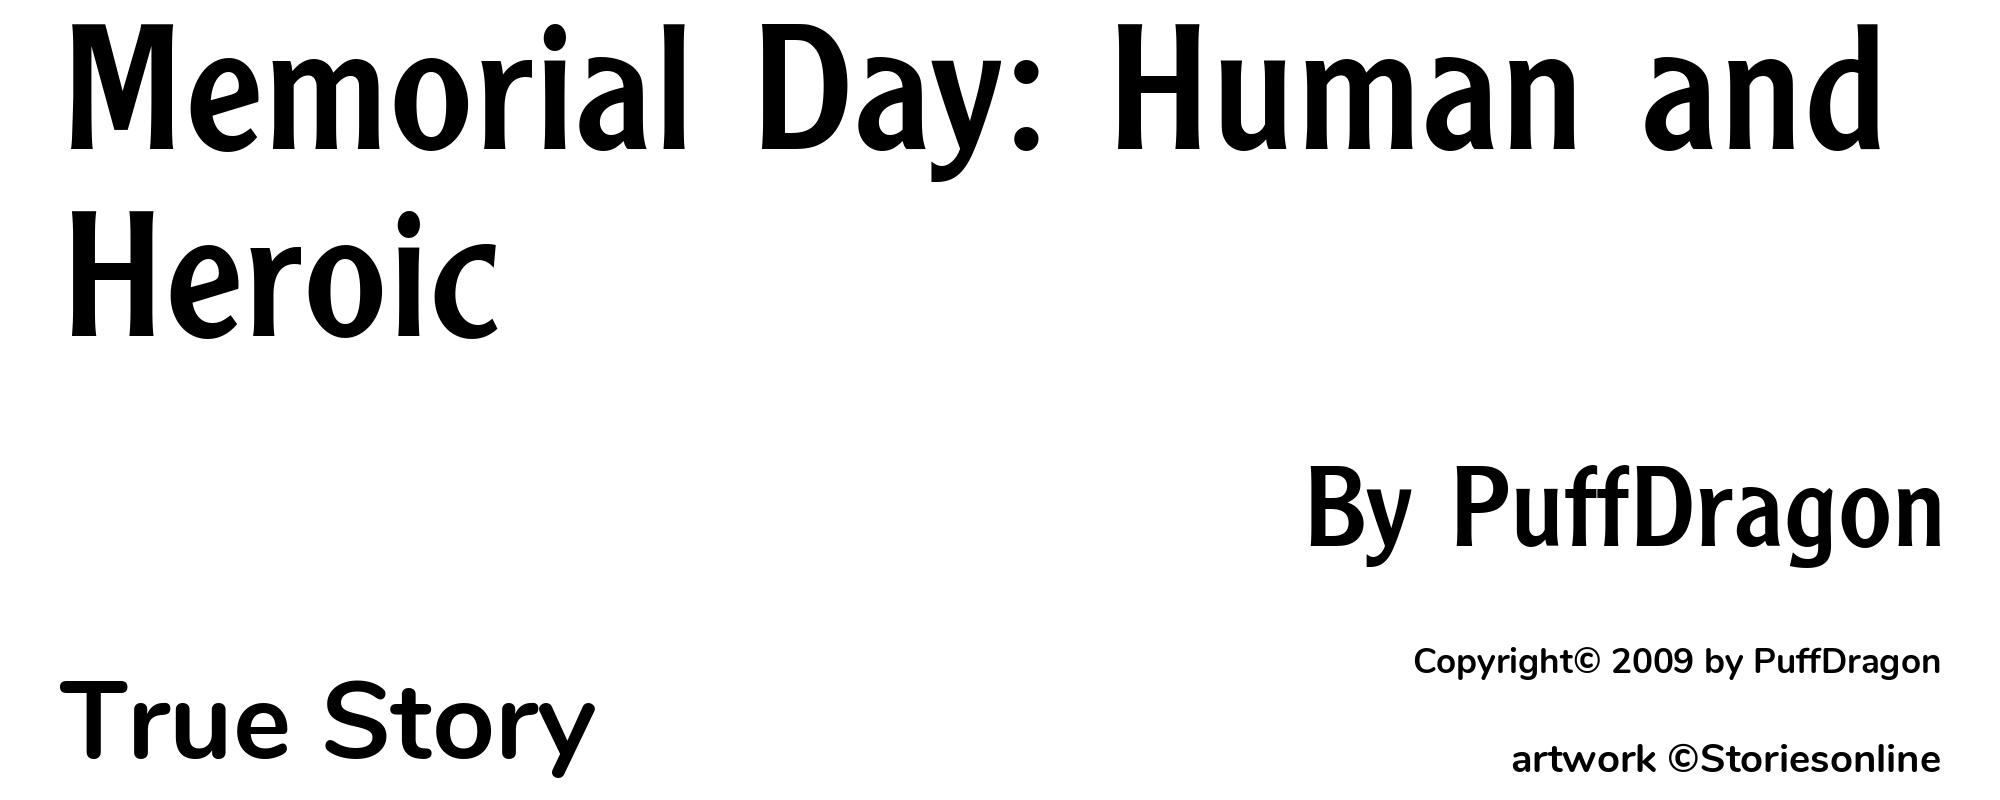 Memorial Day: Human and Heroic - Cover